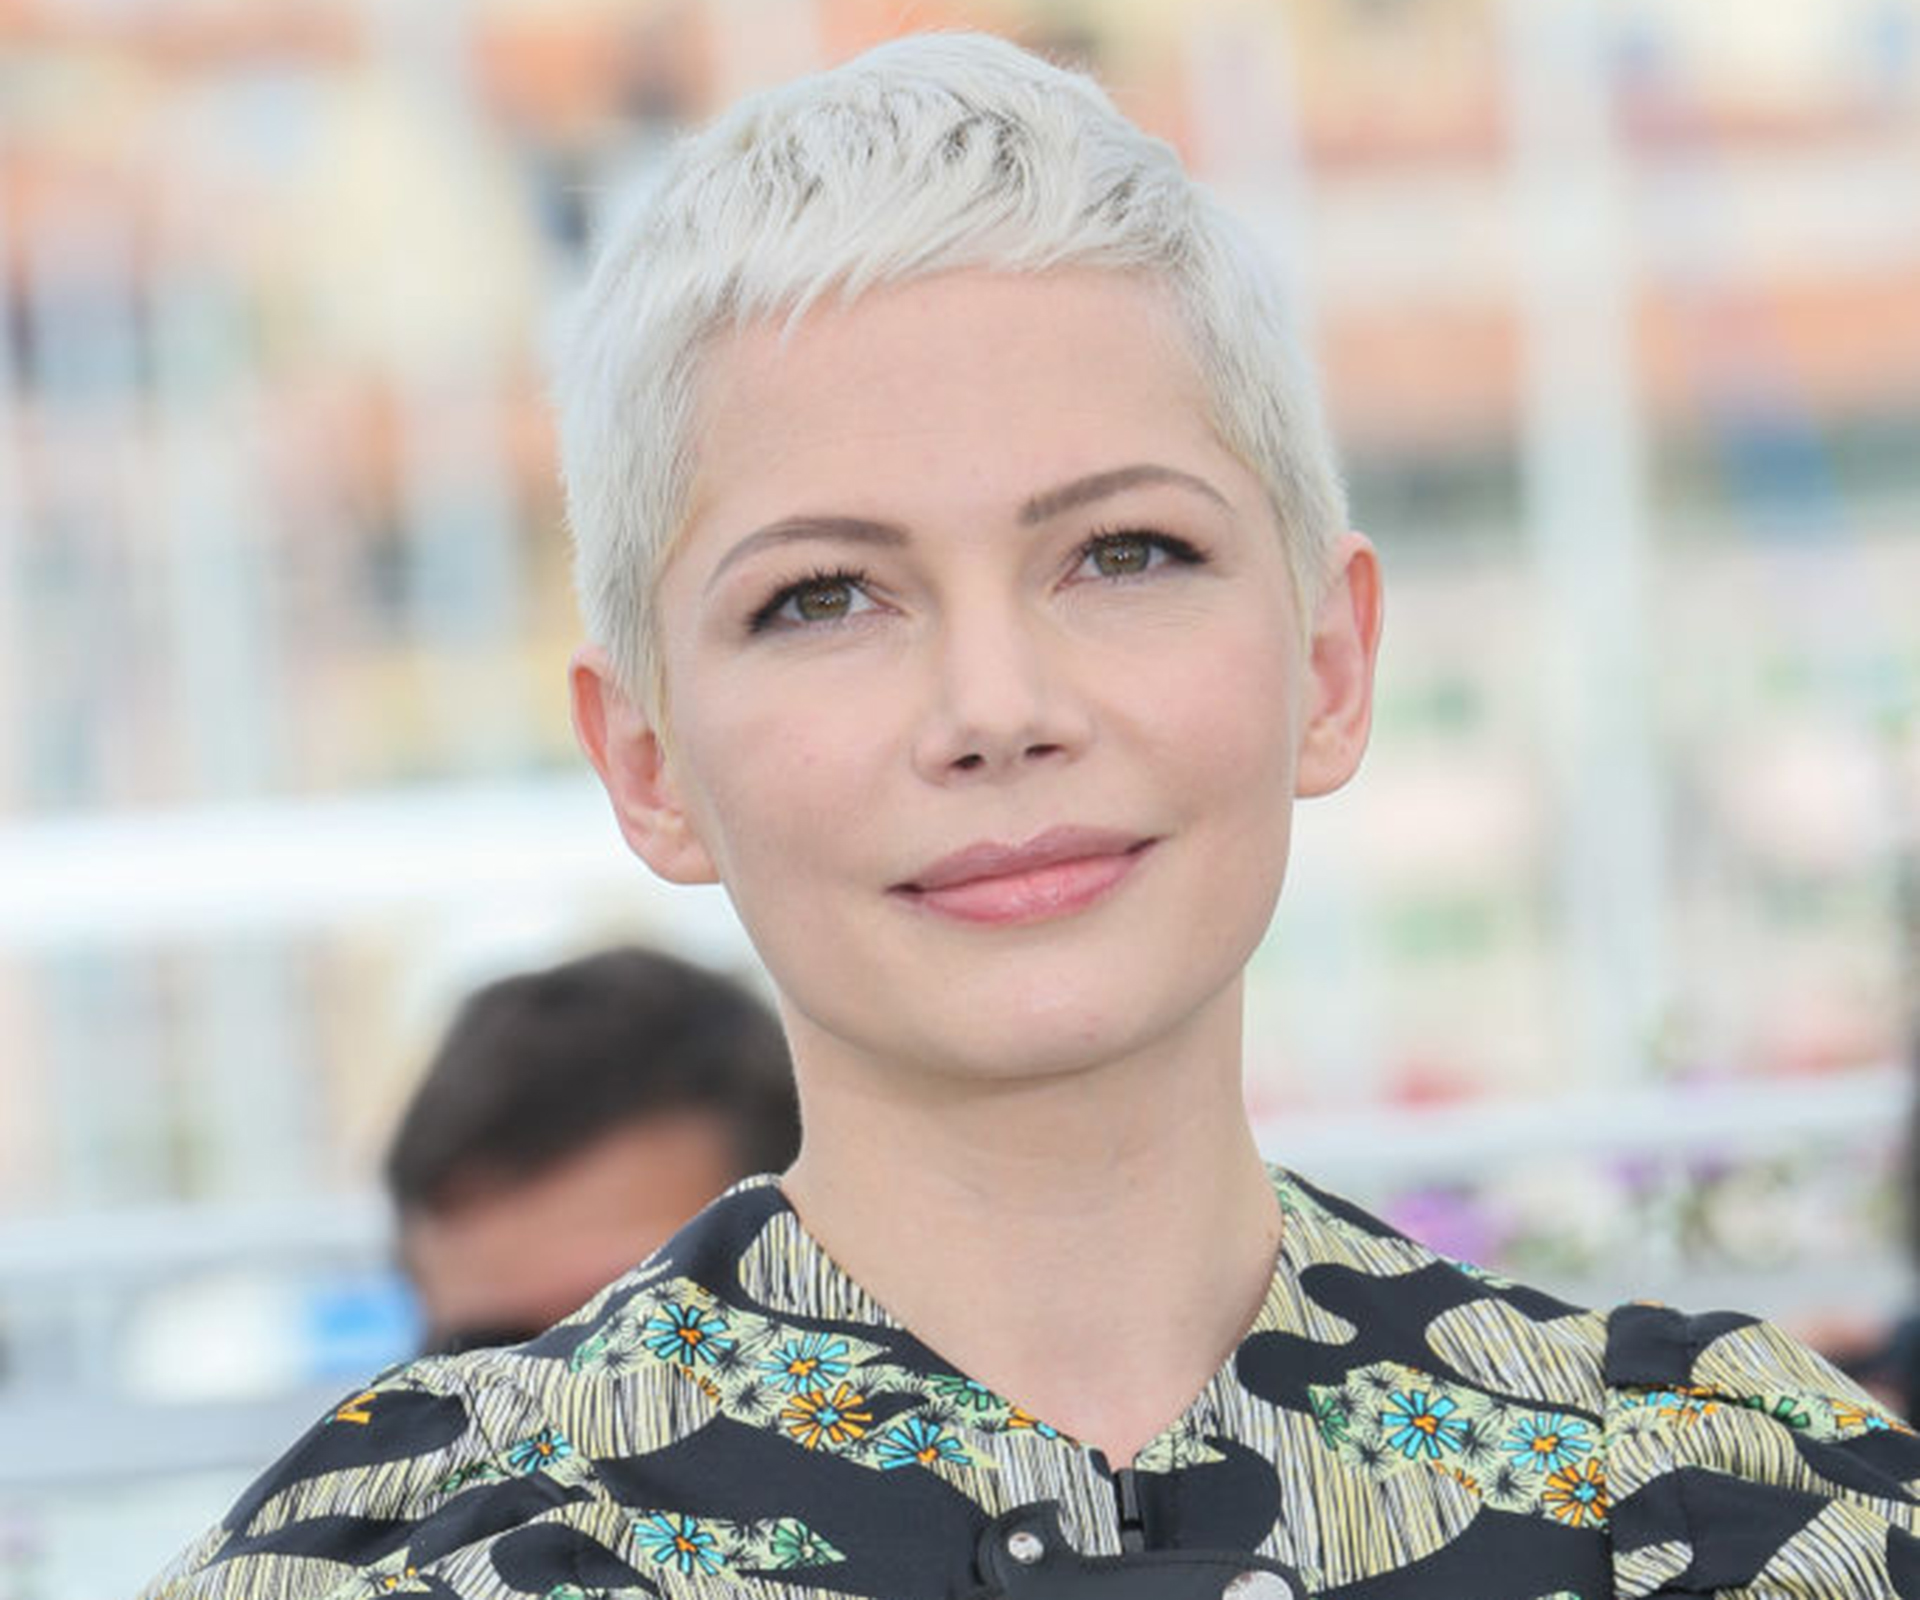 New couple alert? Michelle Williams spotted with mystery man in Italy